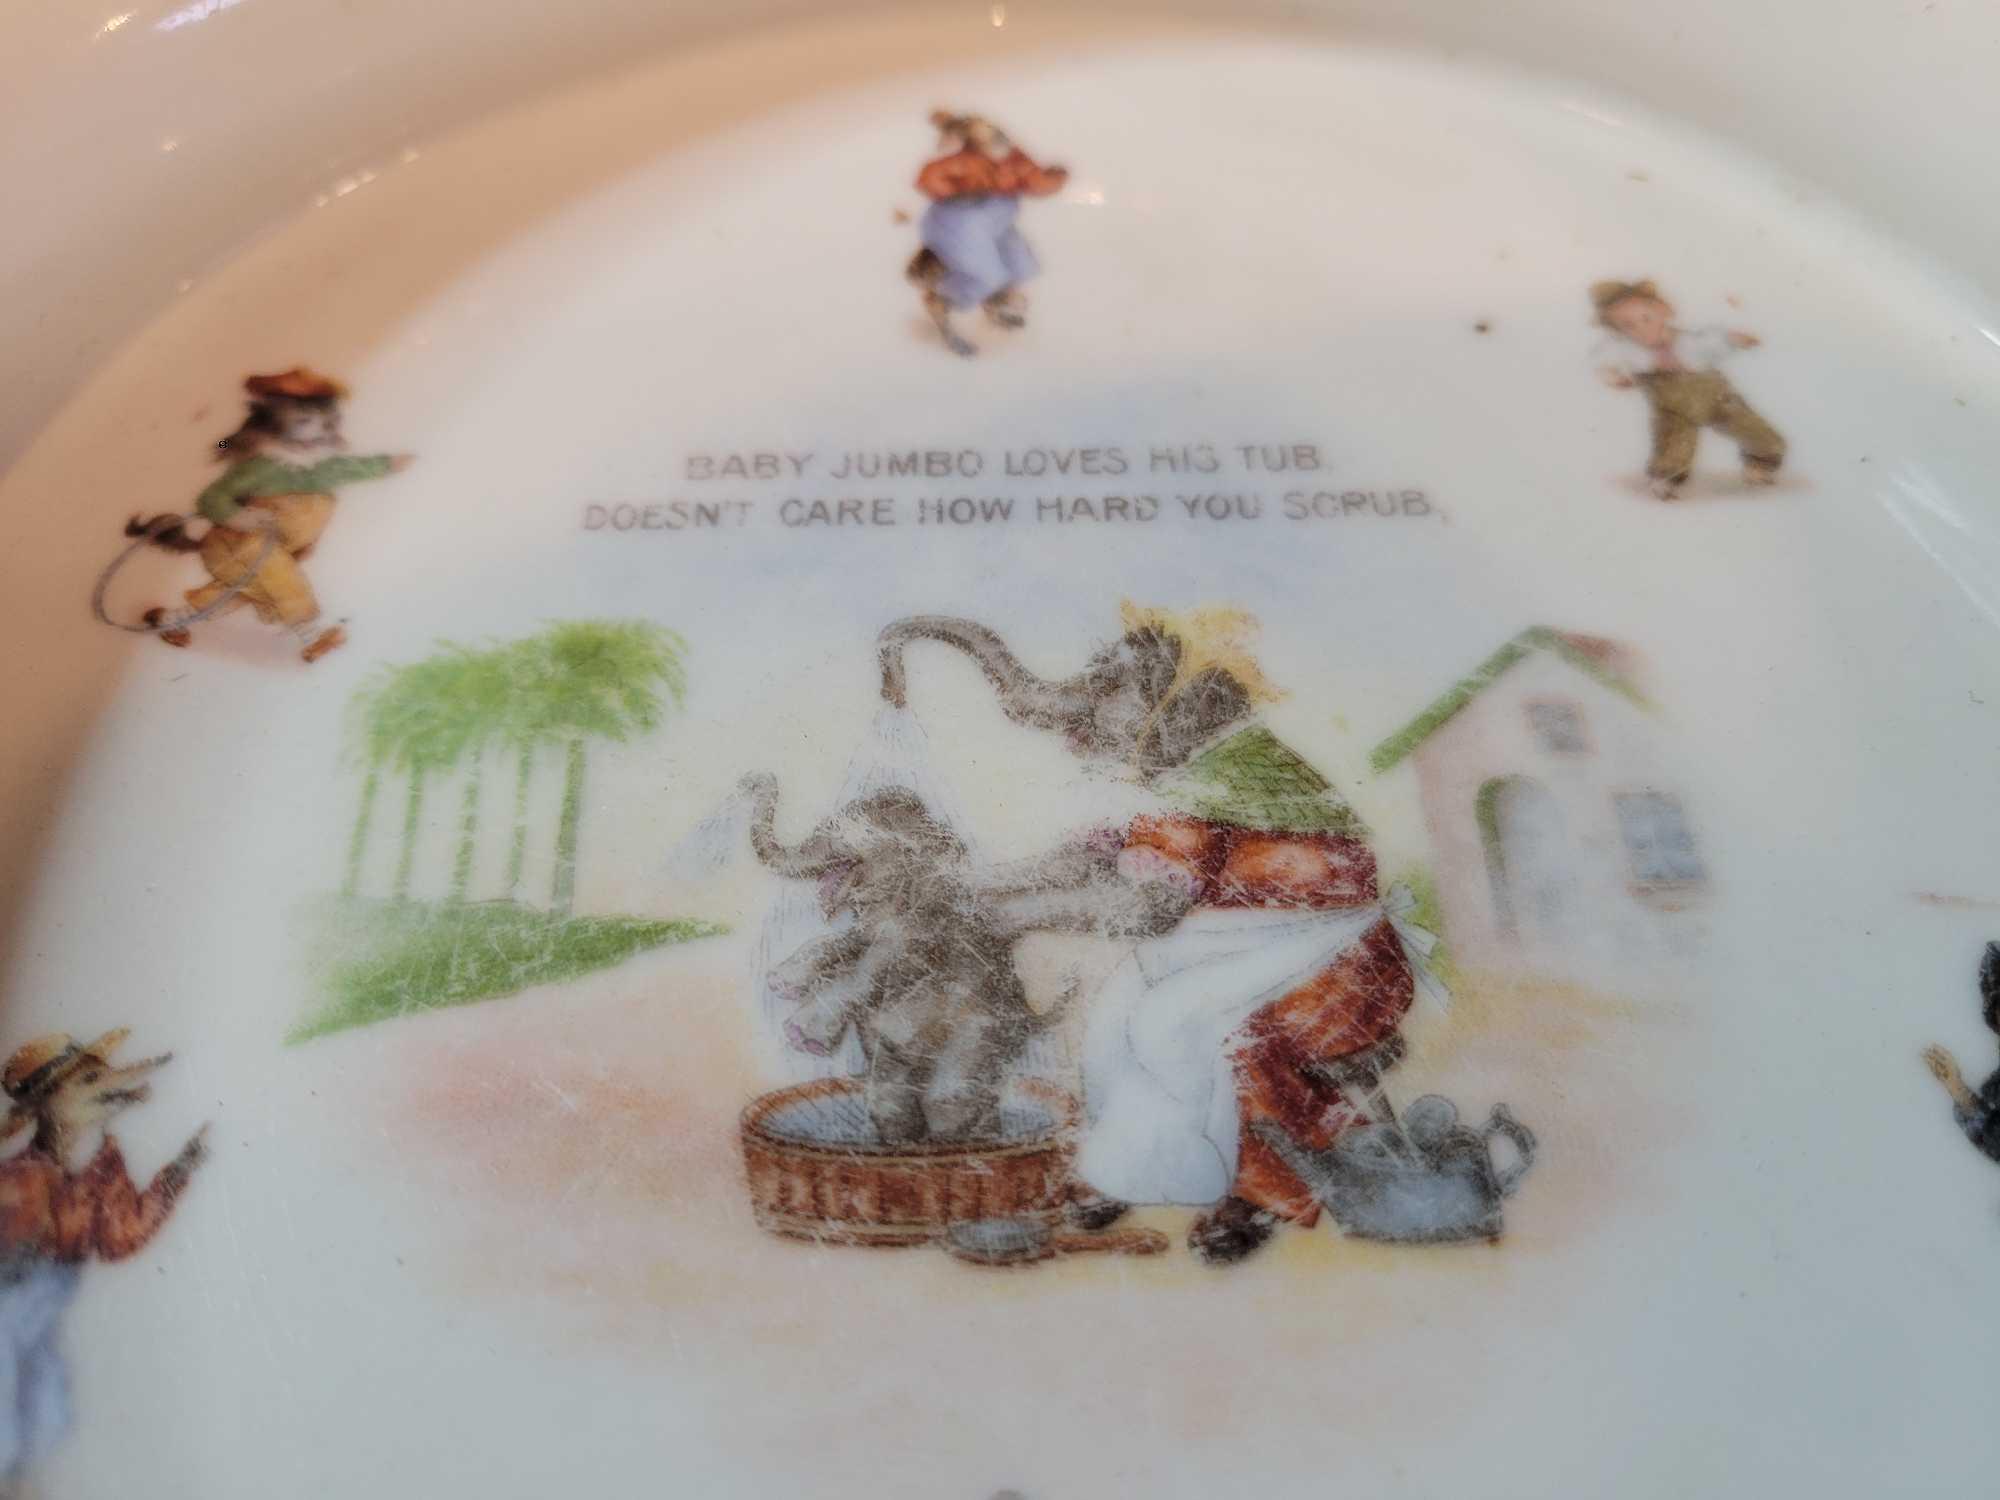 Antique Noritake and German baby feeding dishes